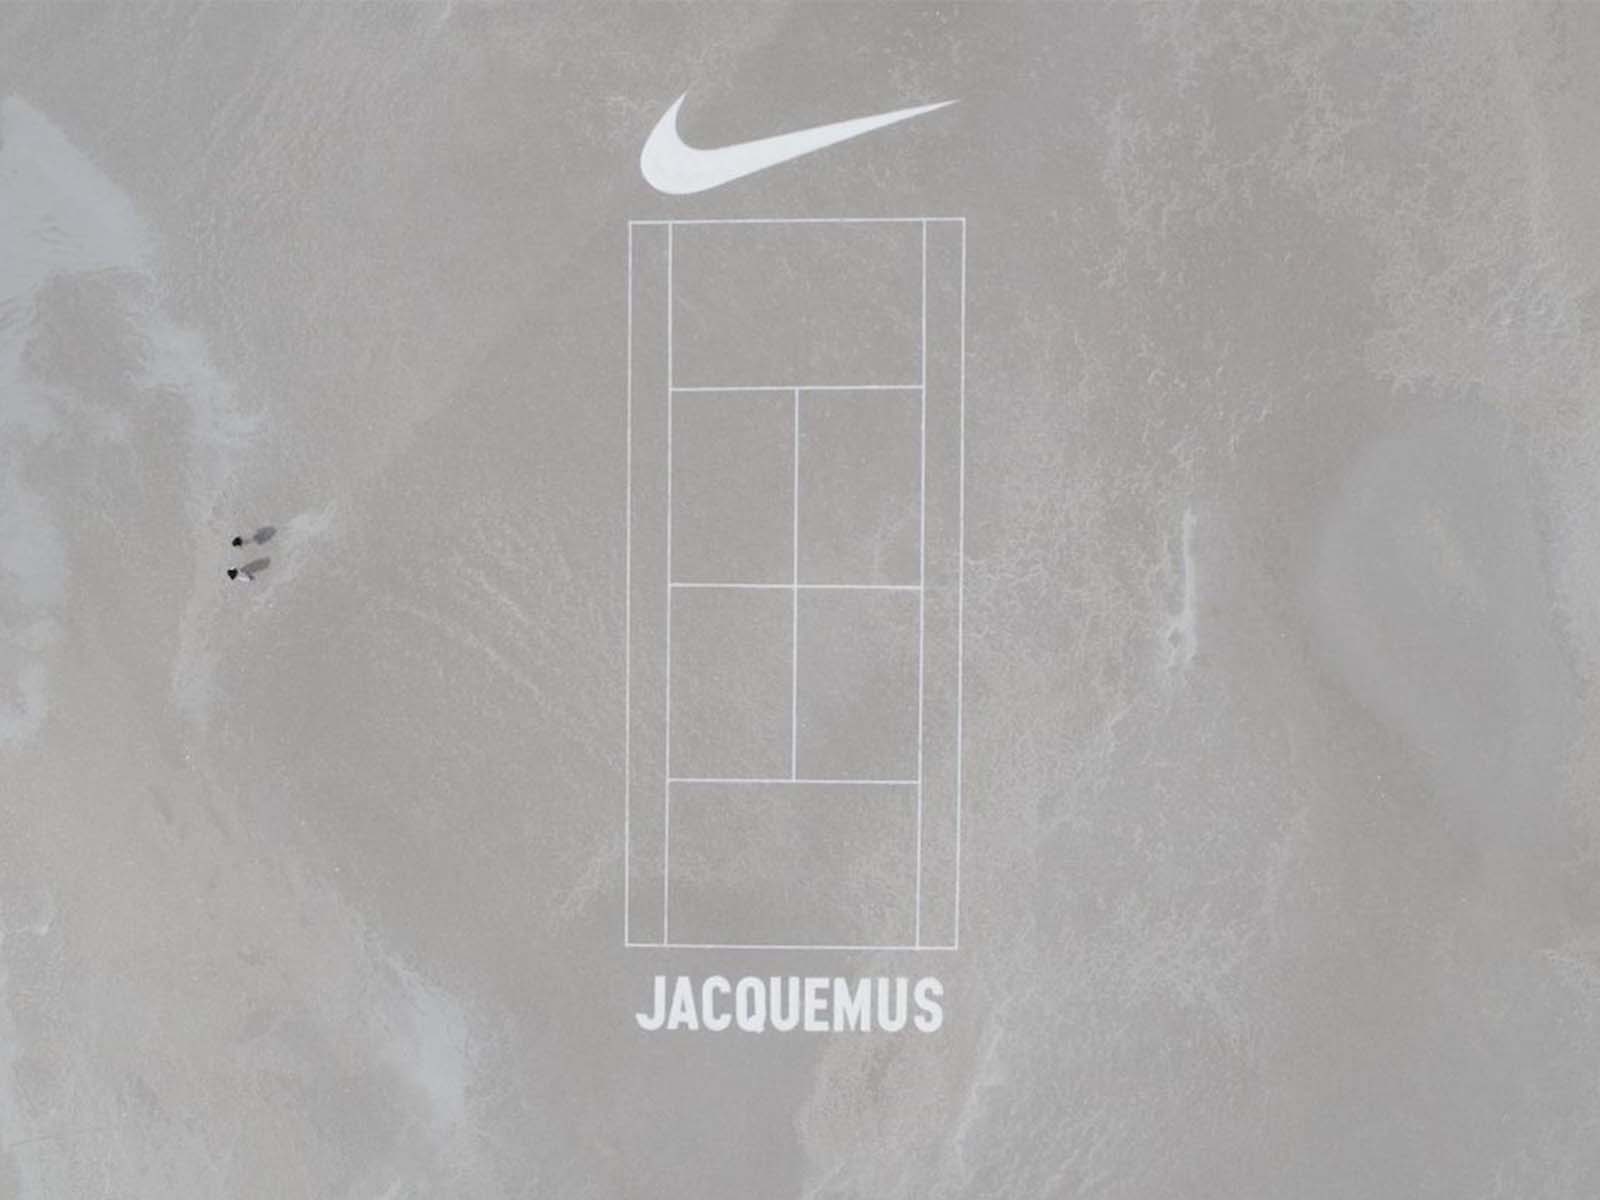 Jacquemus announces collaboration with Nike